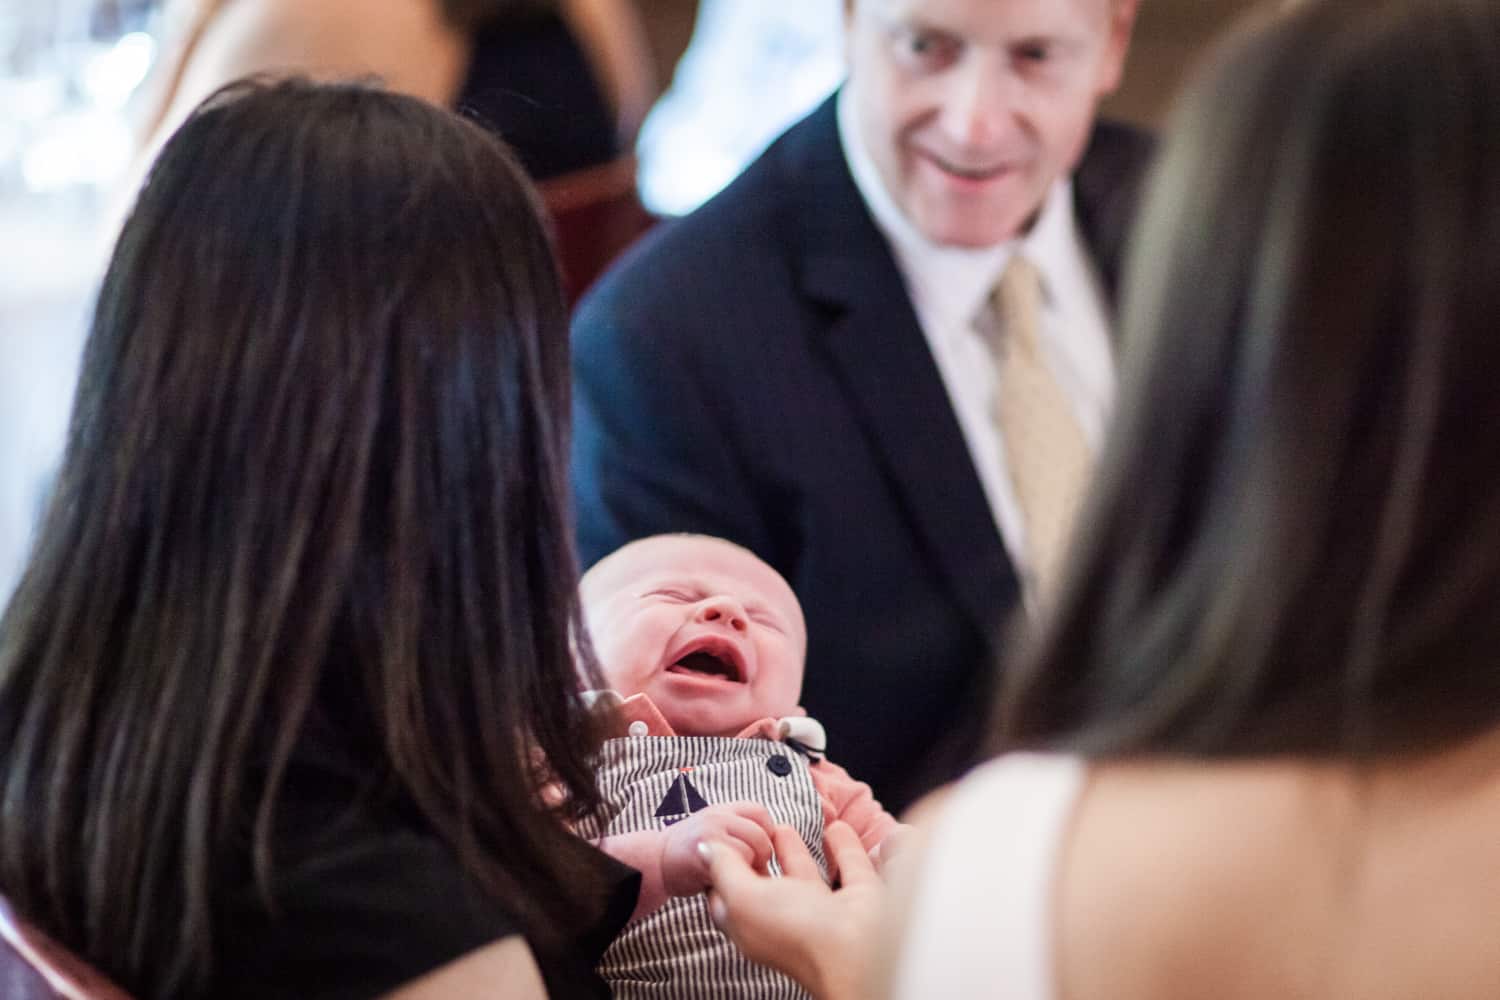 Guests focused on a crying baby at a Hoboken rehearsal dinner